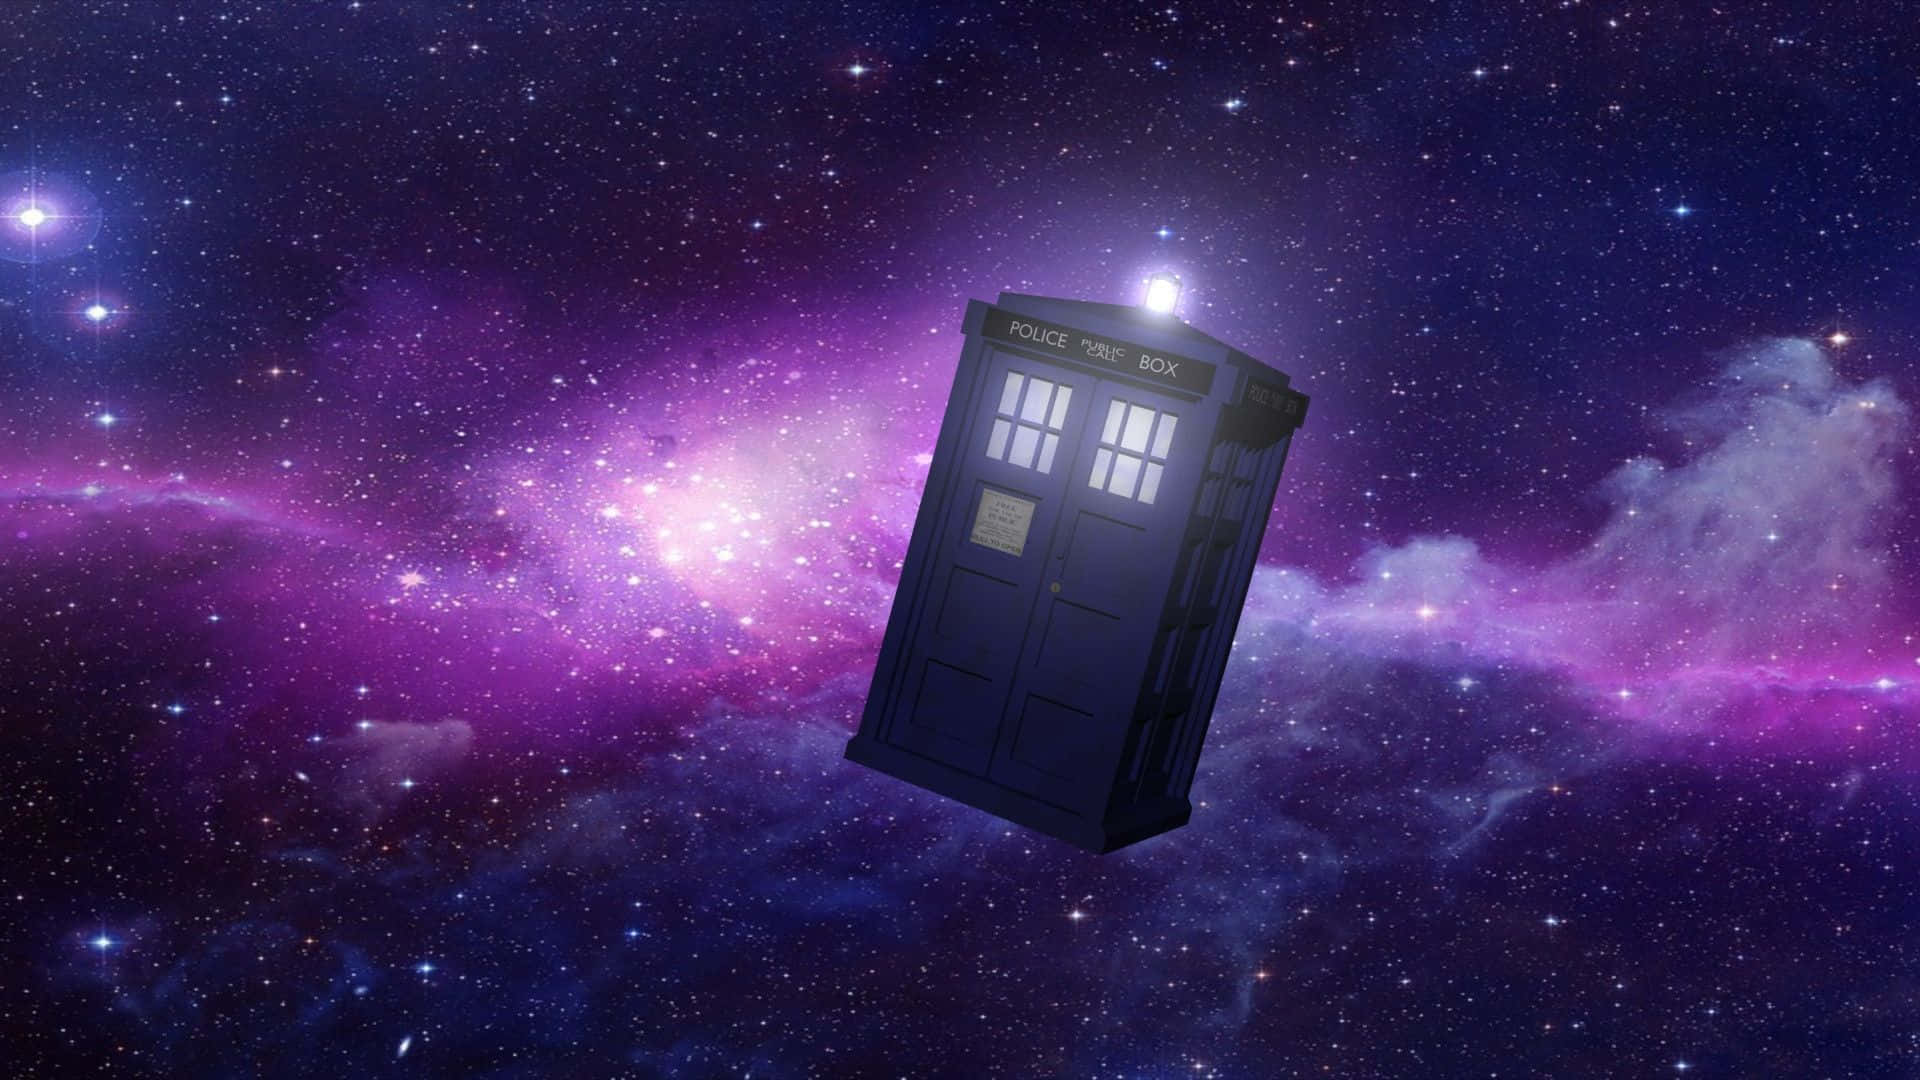 Step inside the famous time and space machine - the Tardis Wallpaper